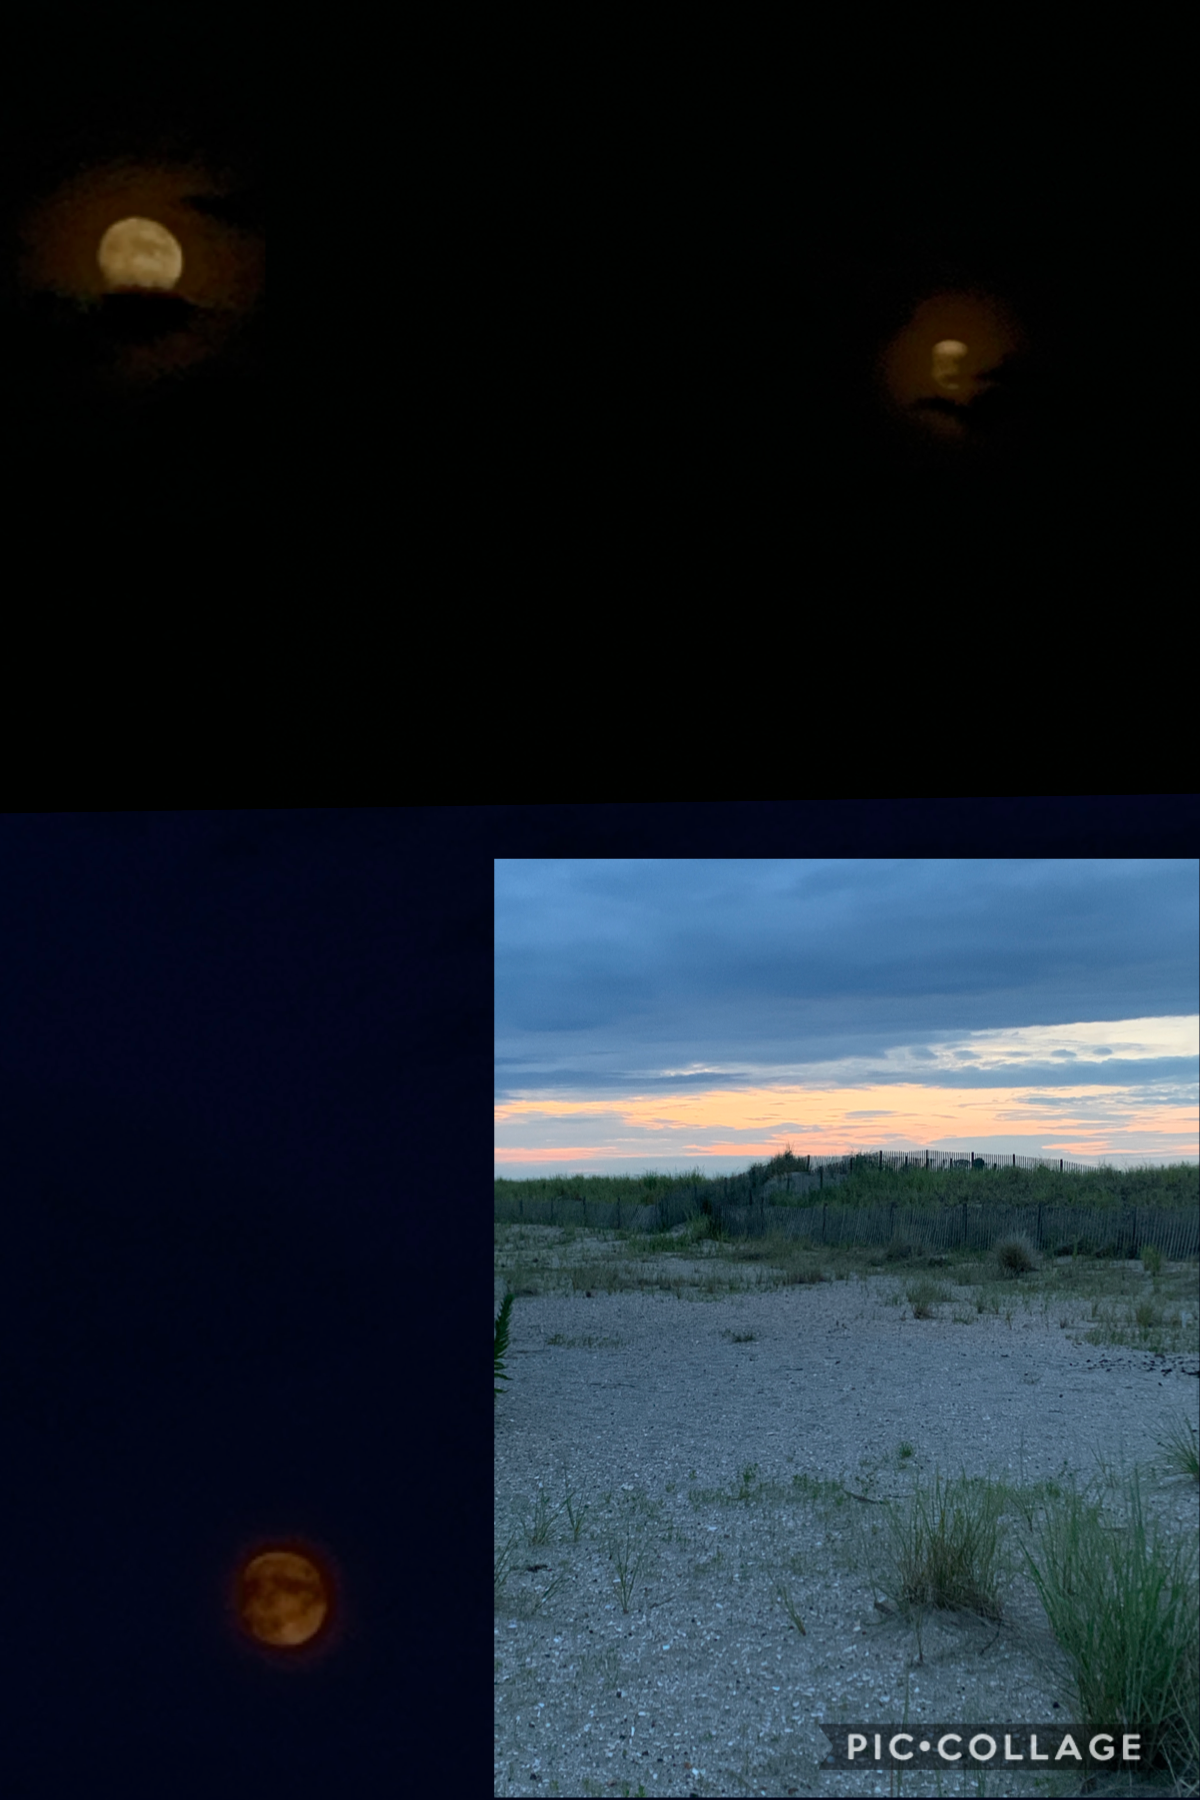 took these pics of the moon and the sunset last night